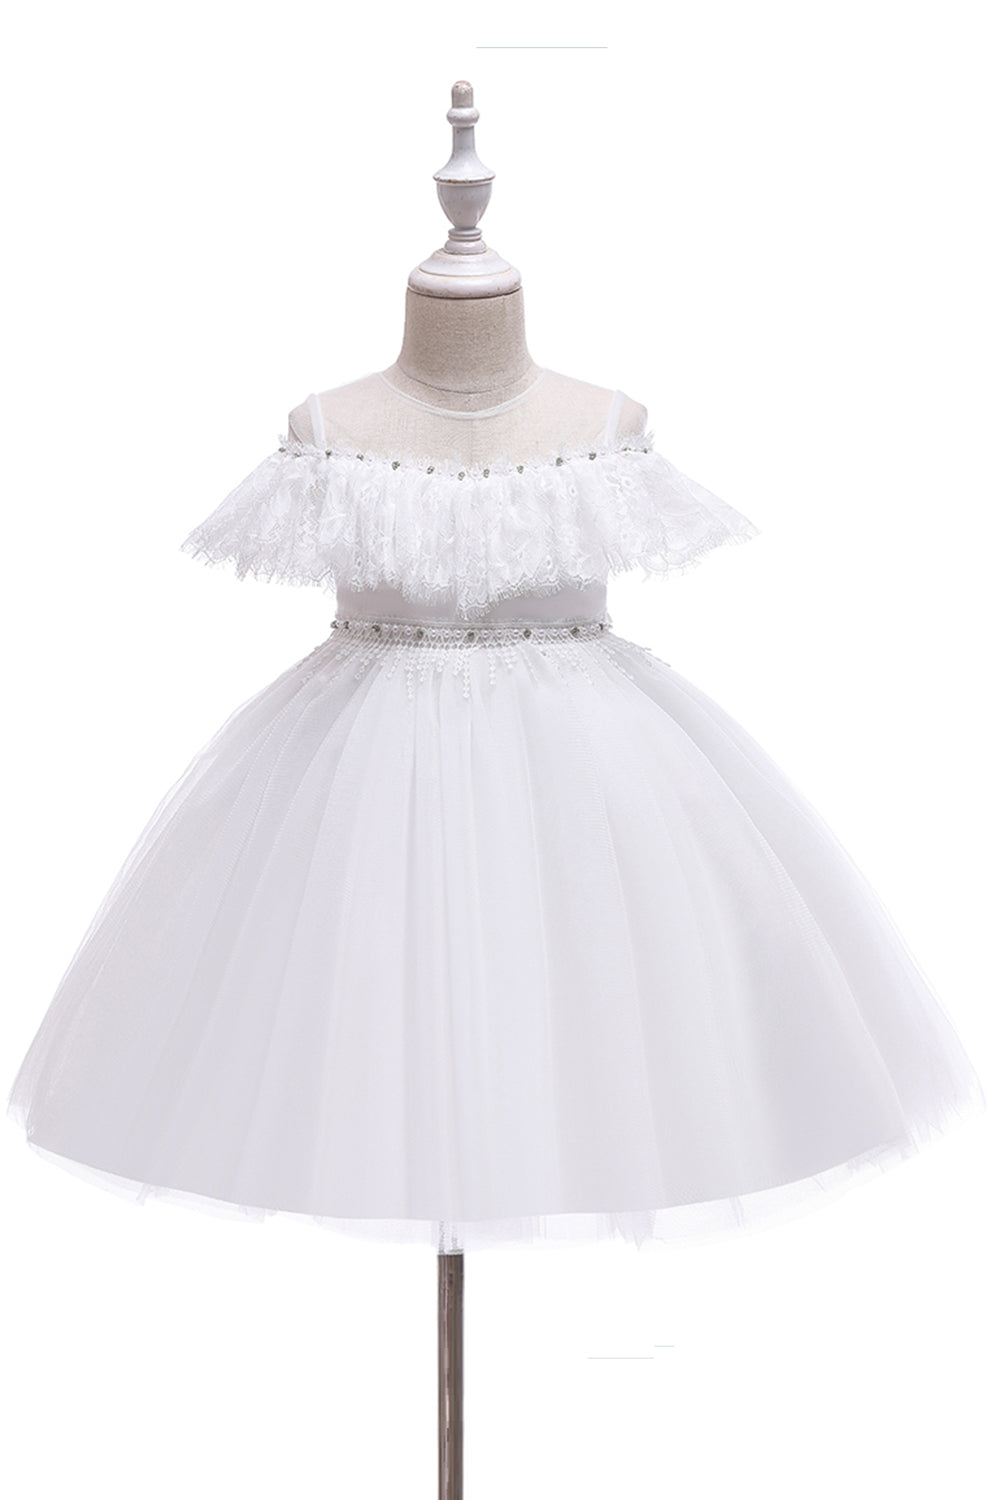 Pink Illusion Round Neck Flower Girl Dress with Lace